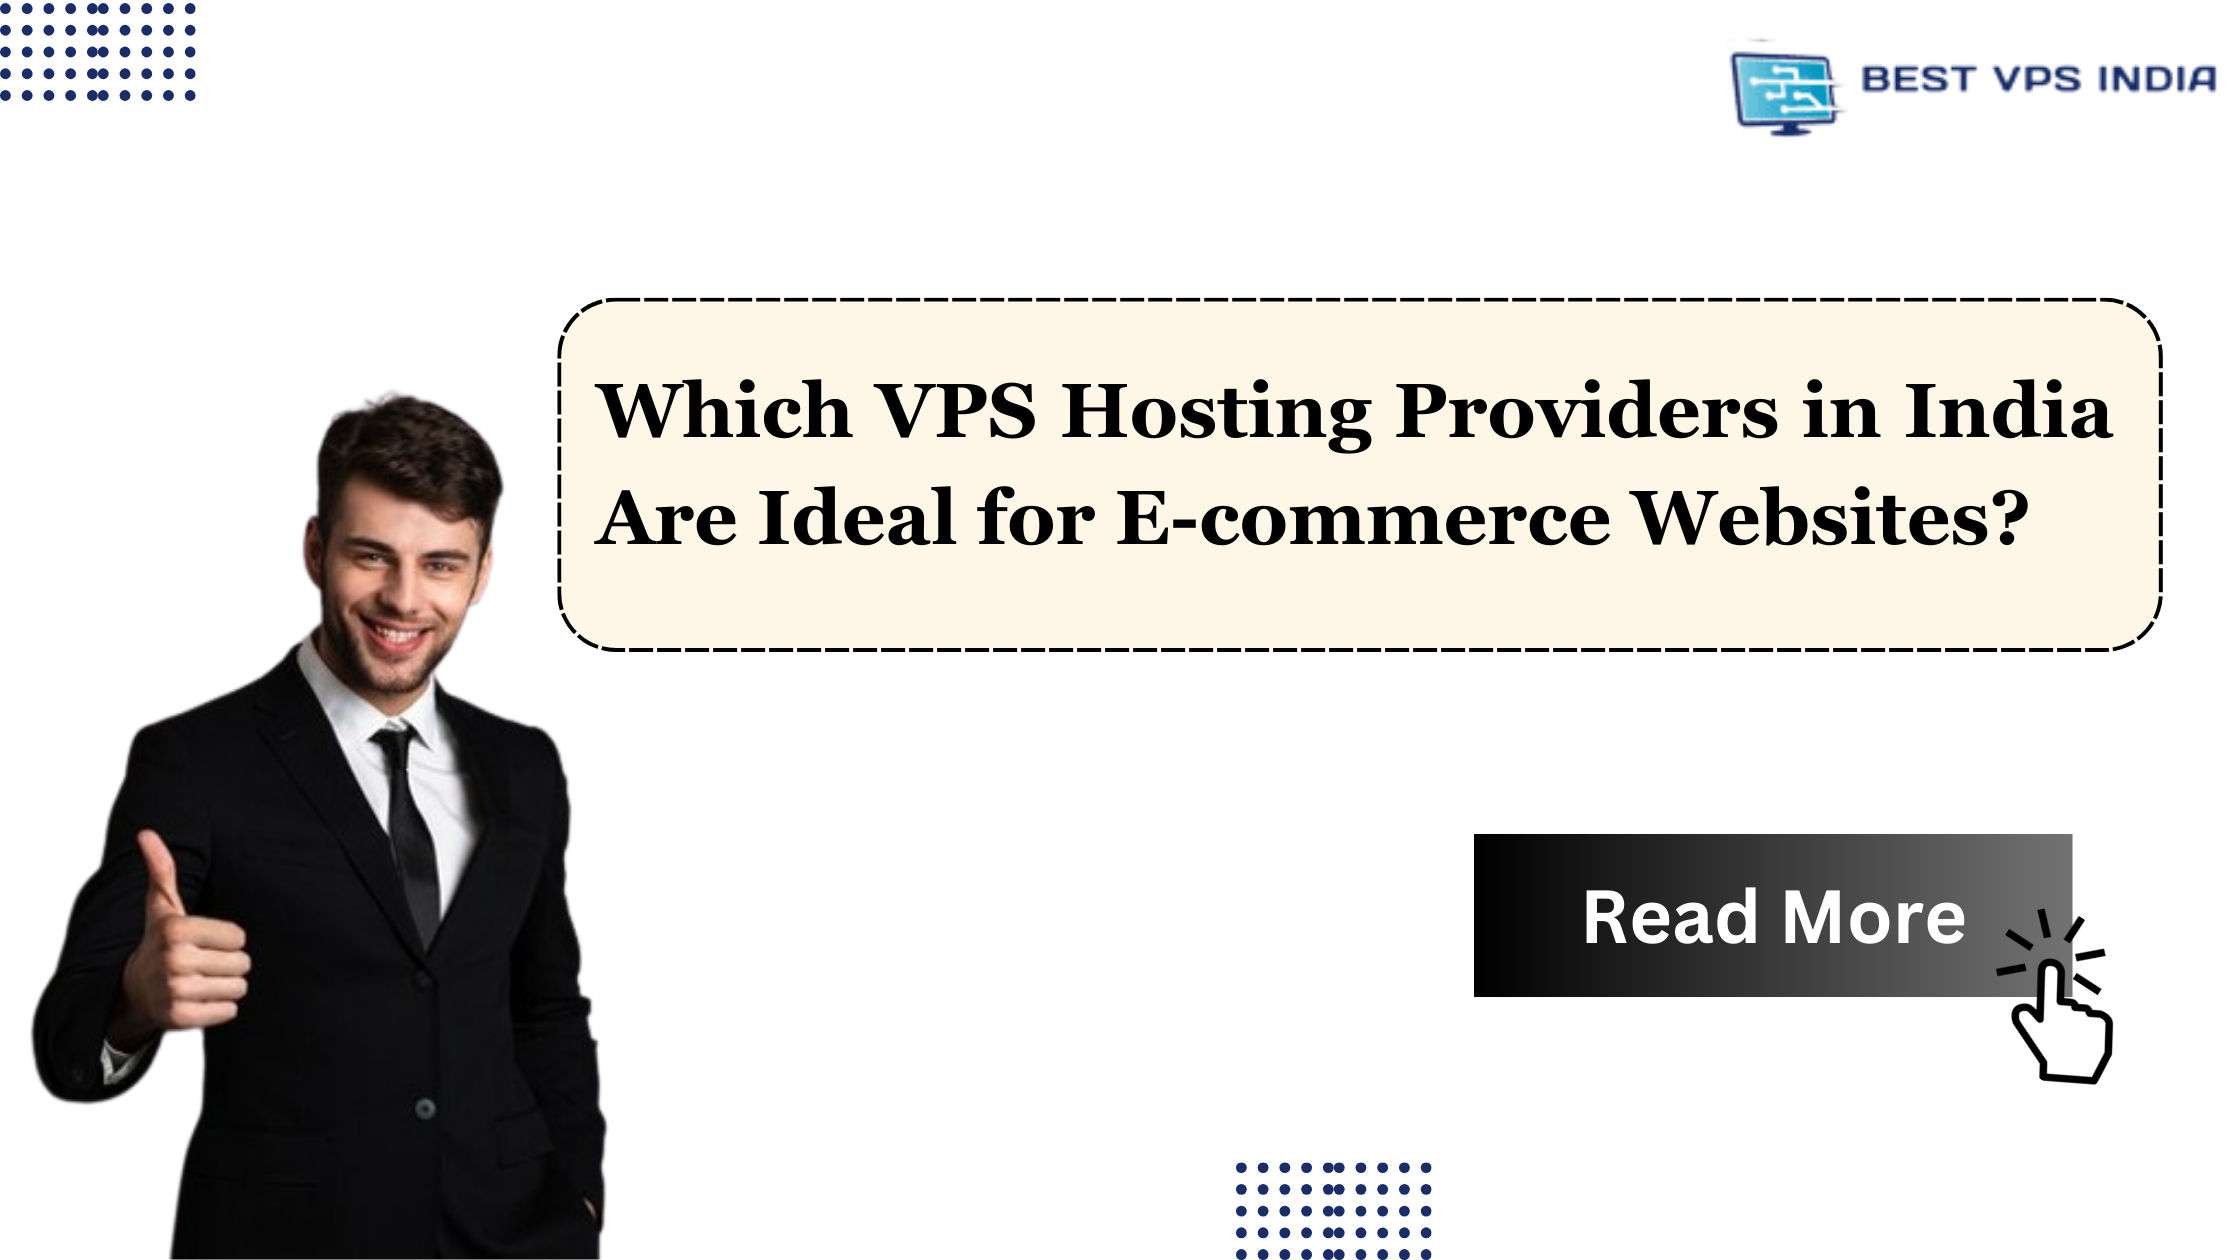 Which VPS Hosting Providers in India Are Ideal for E-commerce Websites